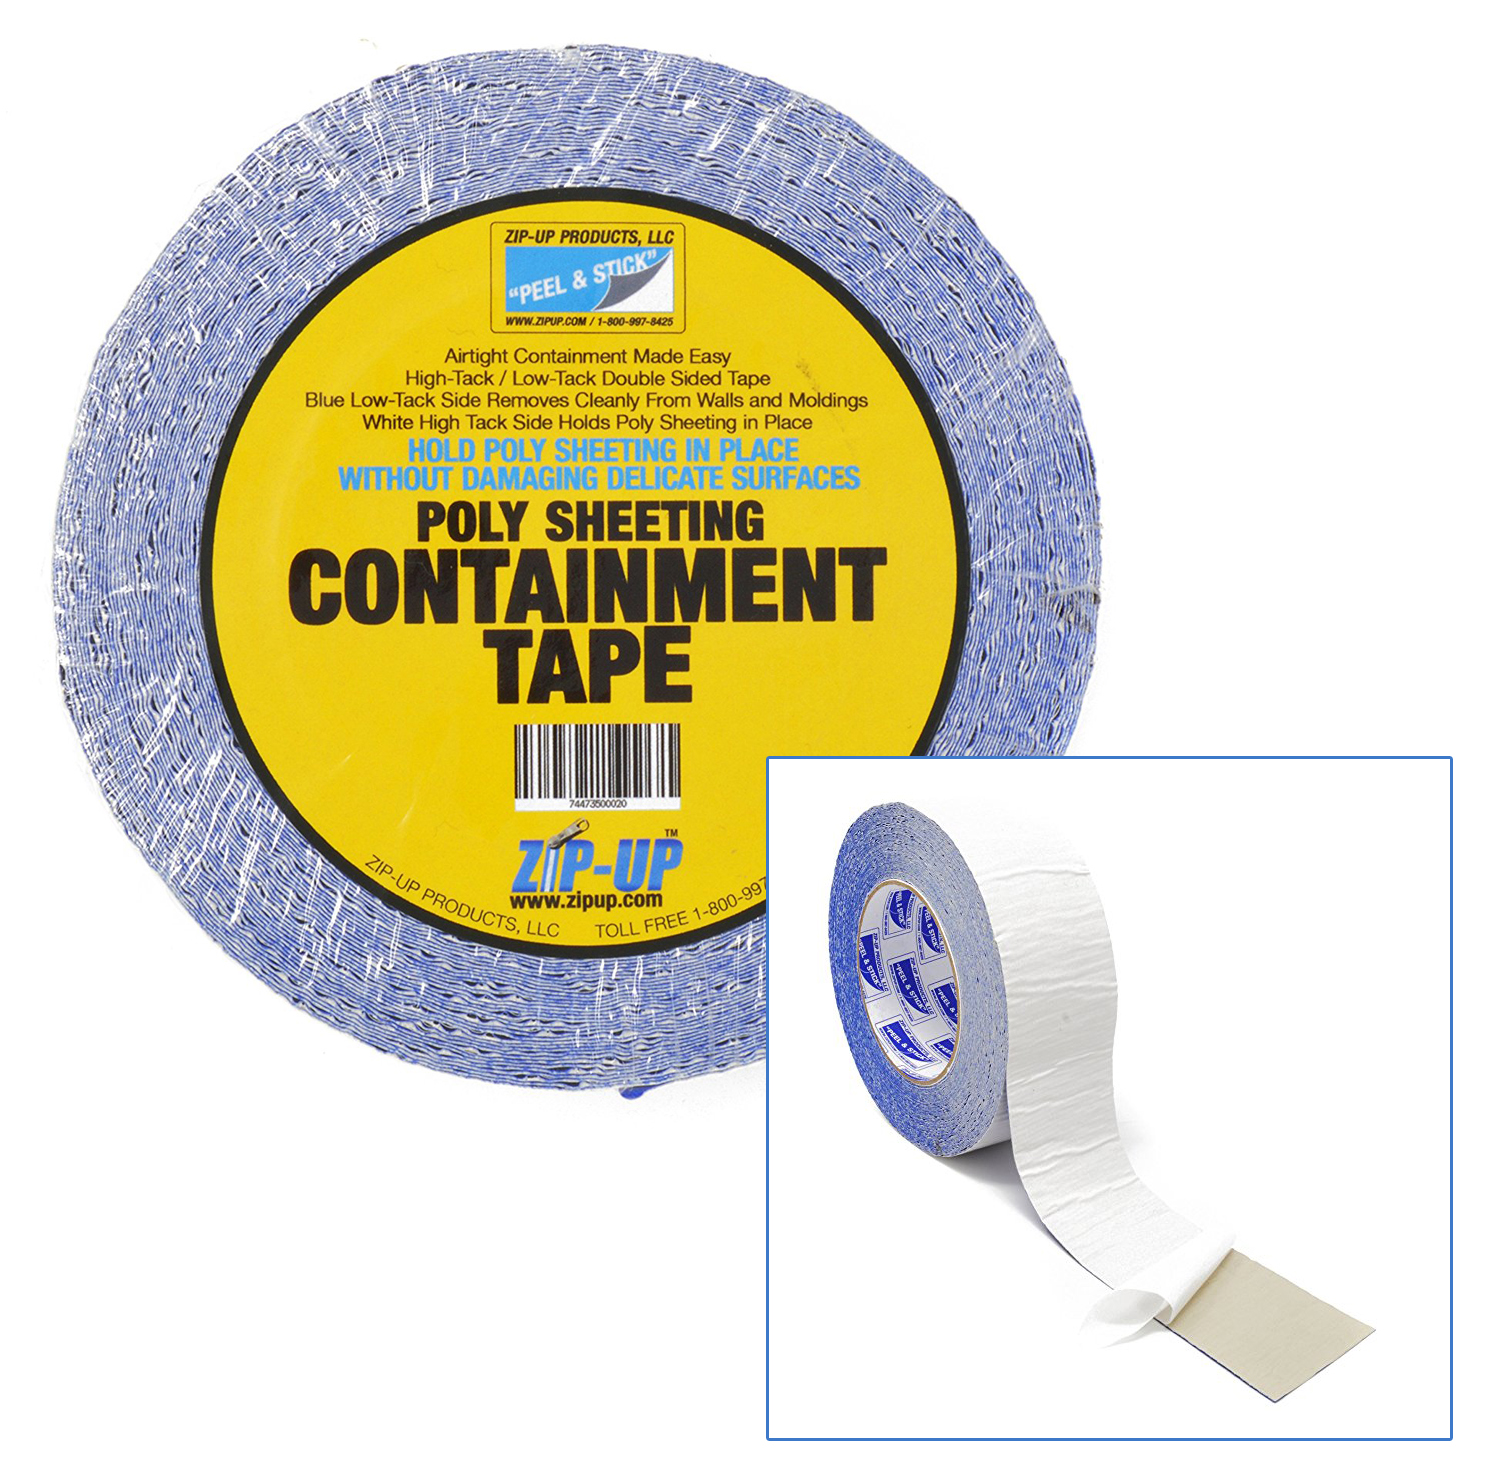 Zip-Up Double Sided Poly Sheeting Containment Tape 2” x 60' Roll - Click Image to Close